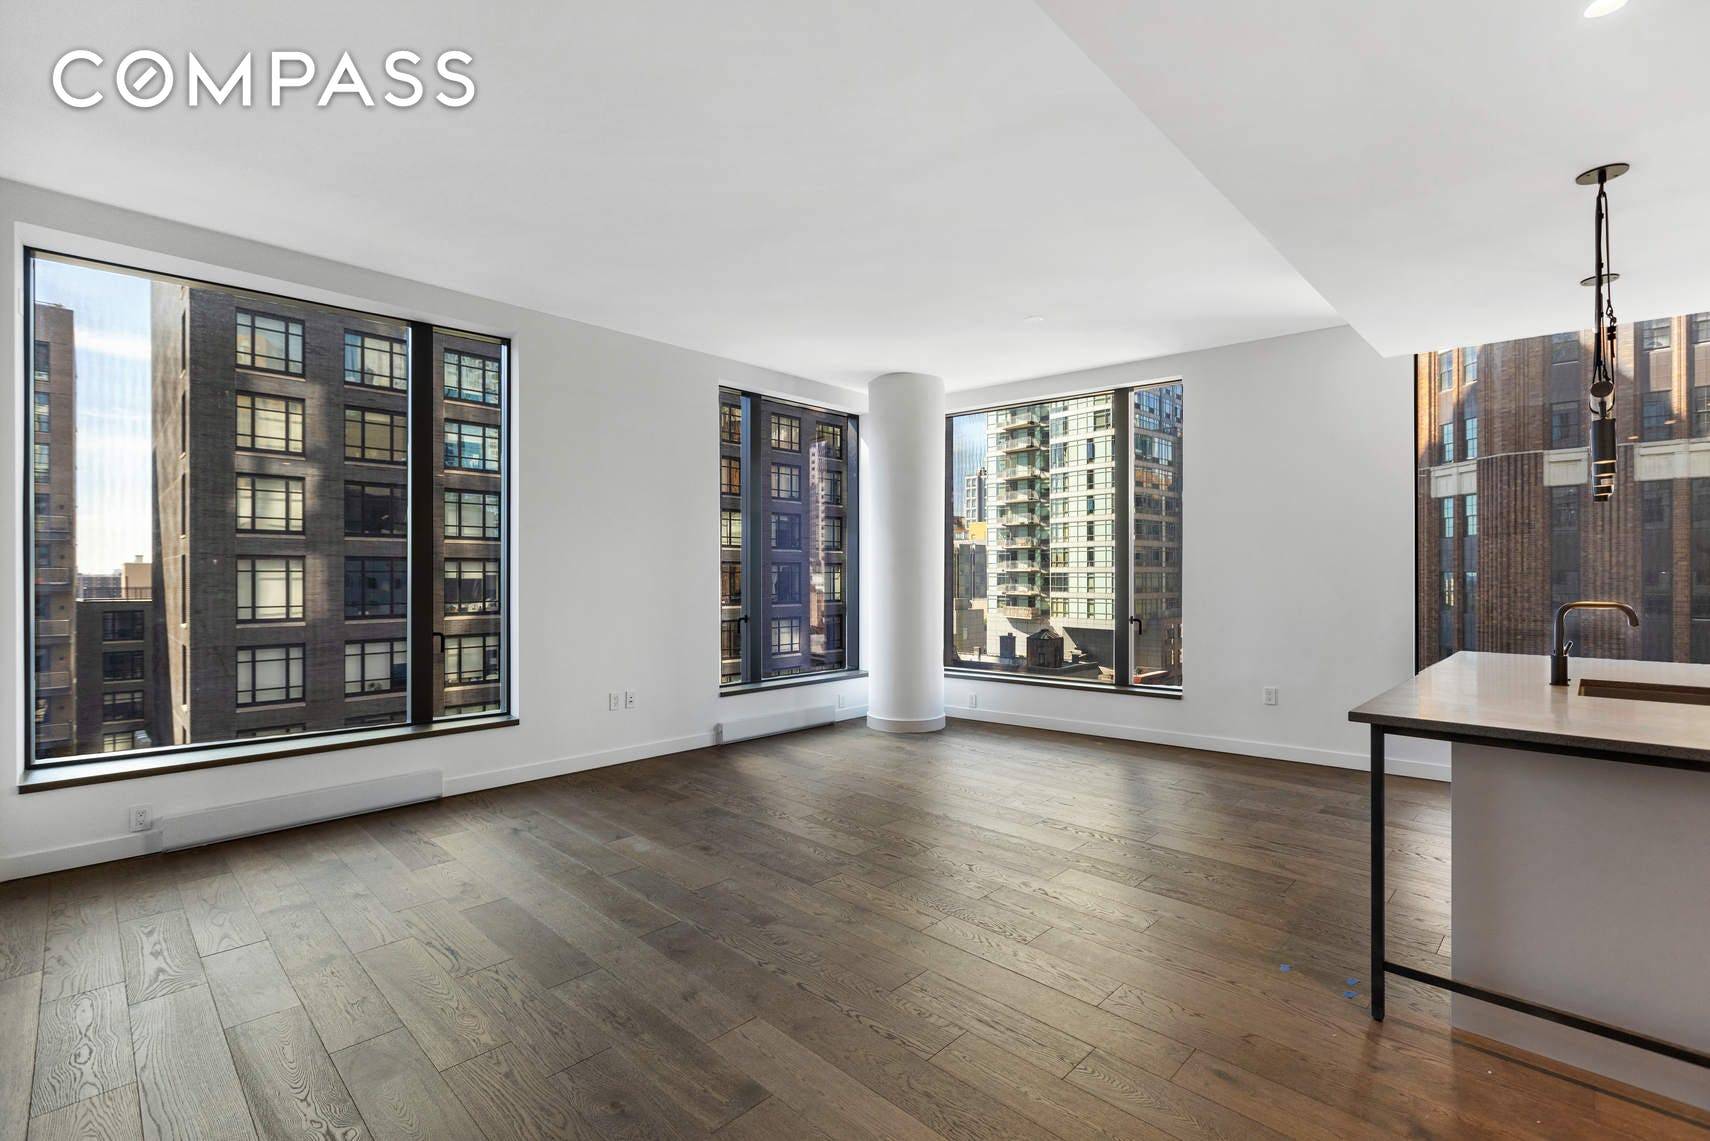 Corner Two Bedroom Two Bathroom Unit with Views Residence 9L features a split two bedroom, two bathroom layout in the Heritage palette, with views over the 11 Hoyt park to ...